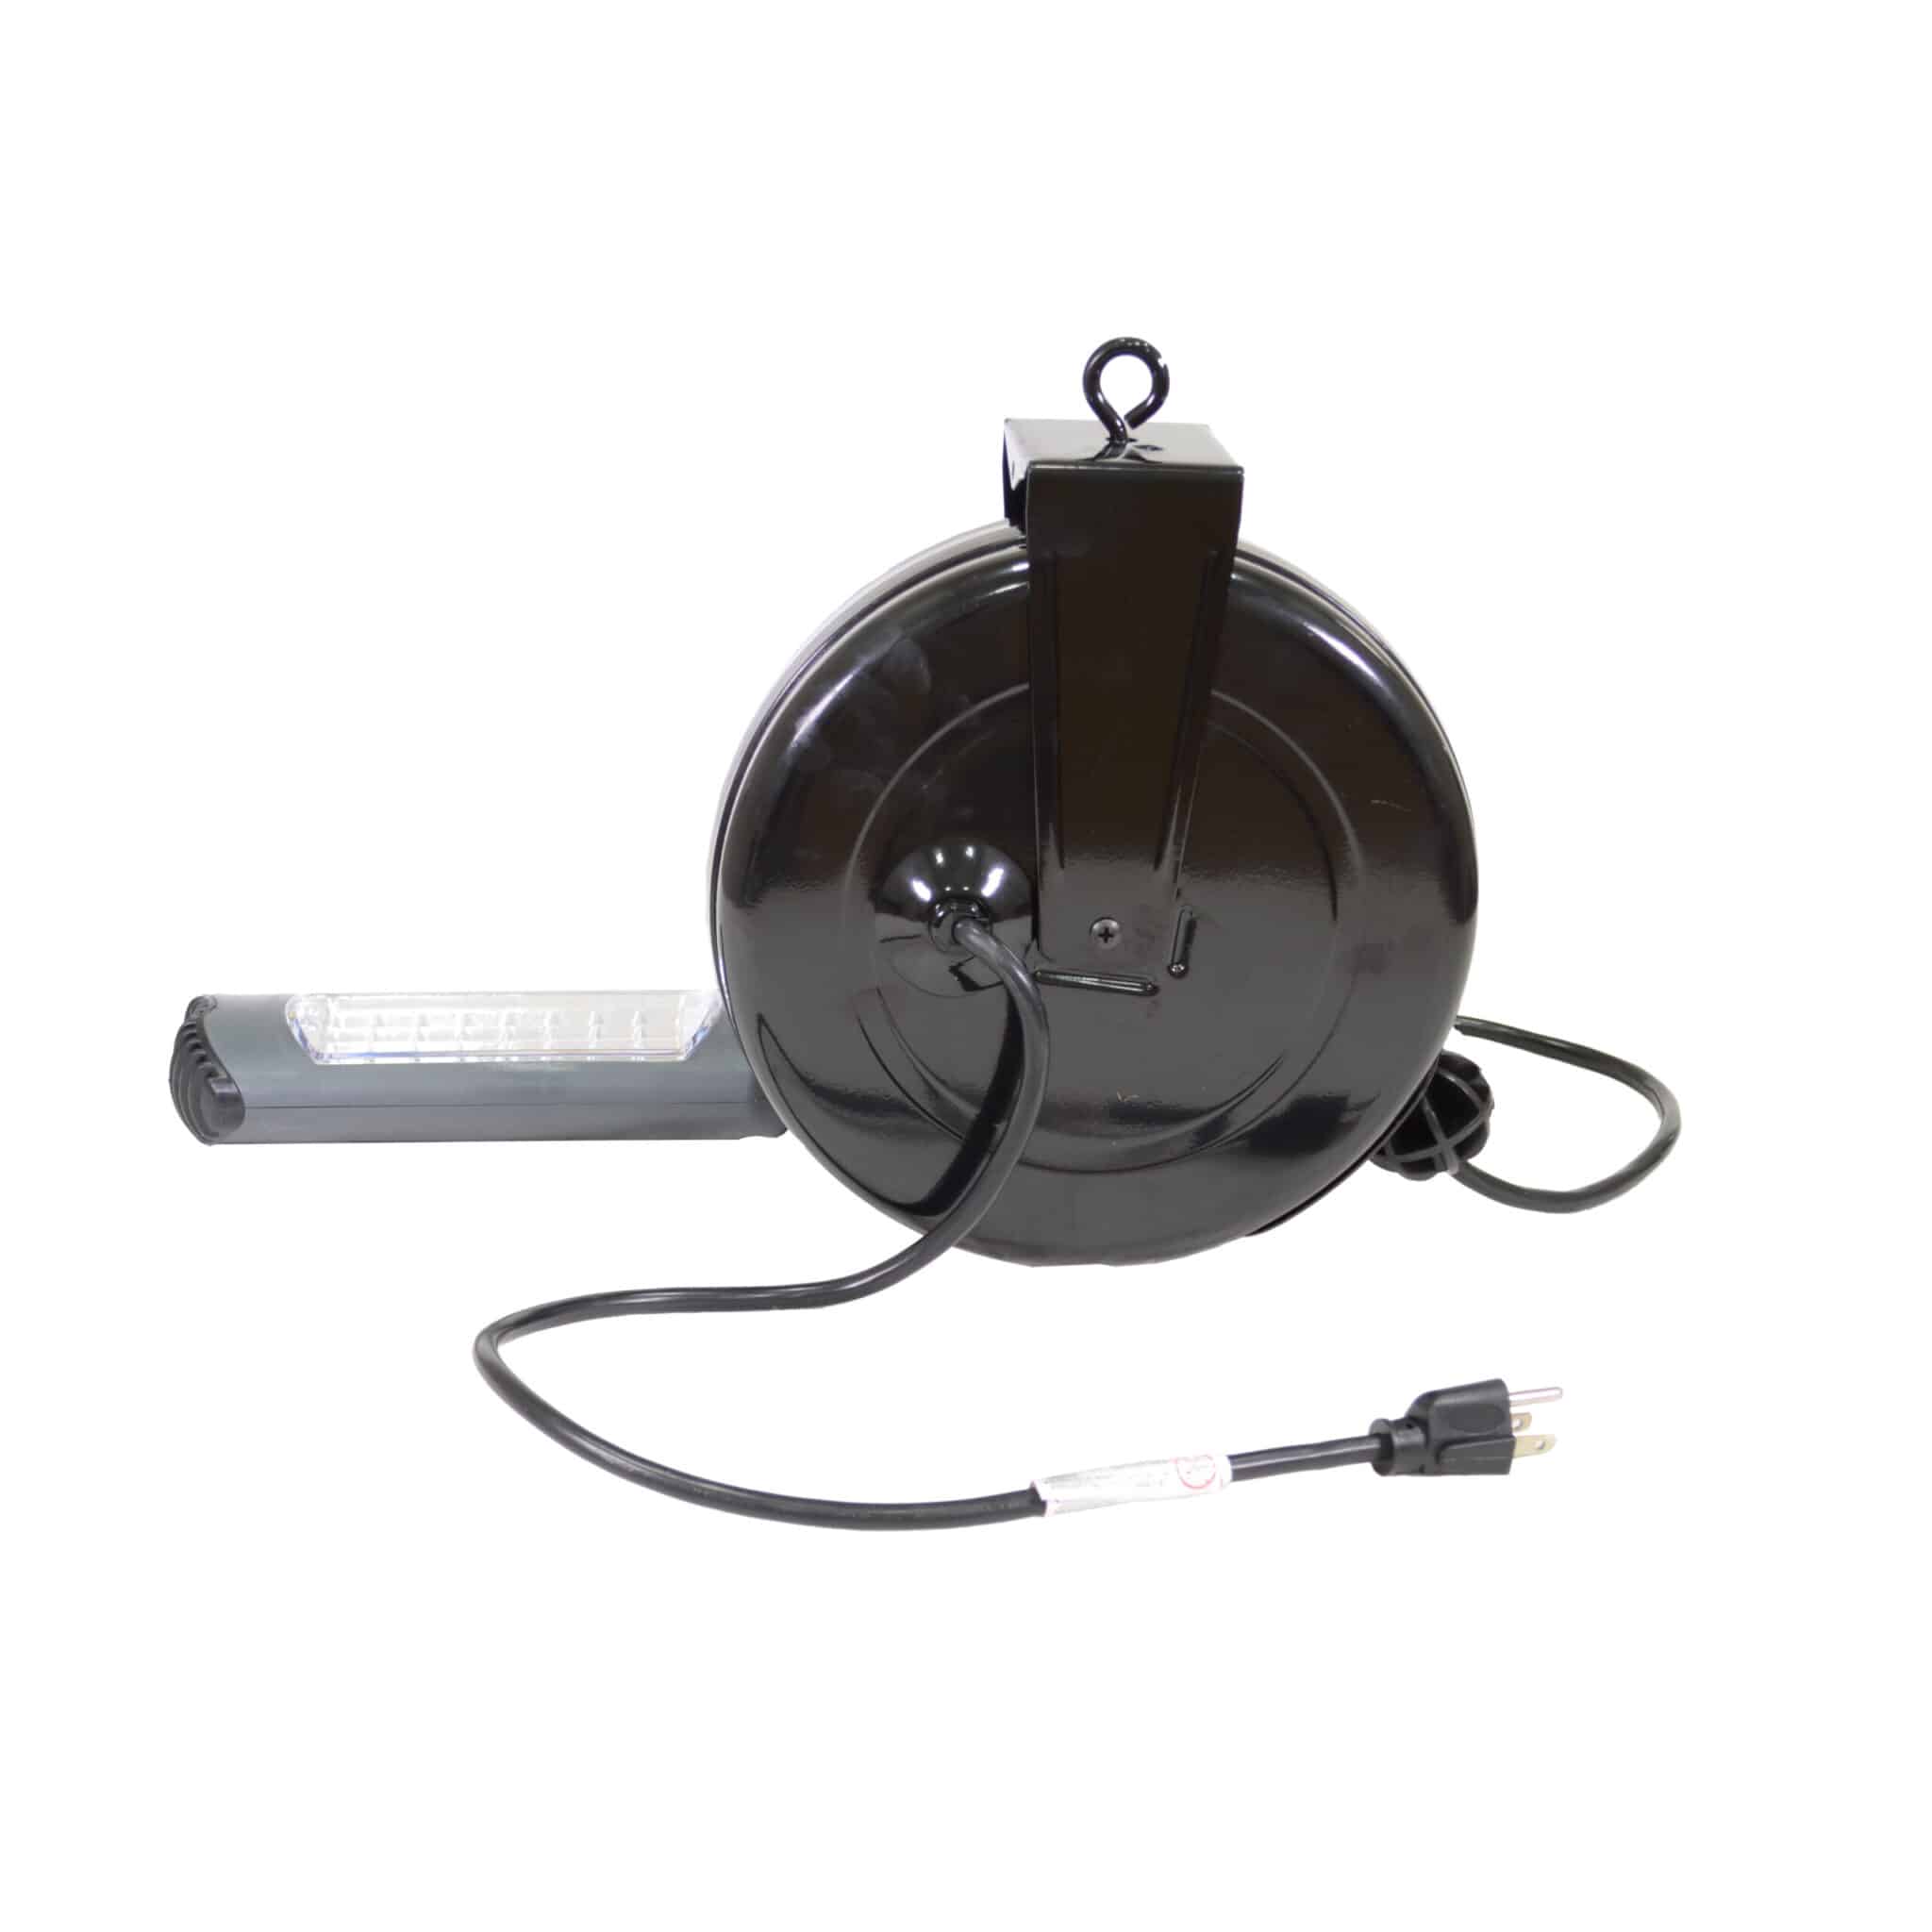 30' Pro Retractable Cord Reel with LED Light